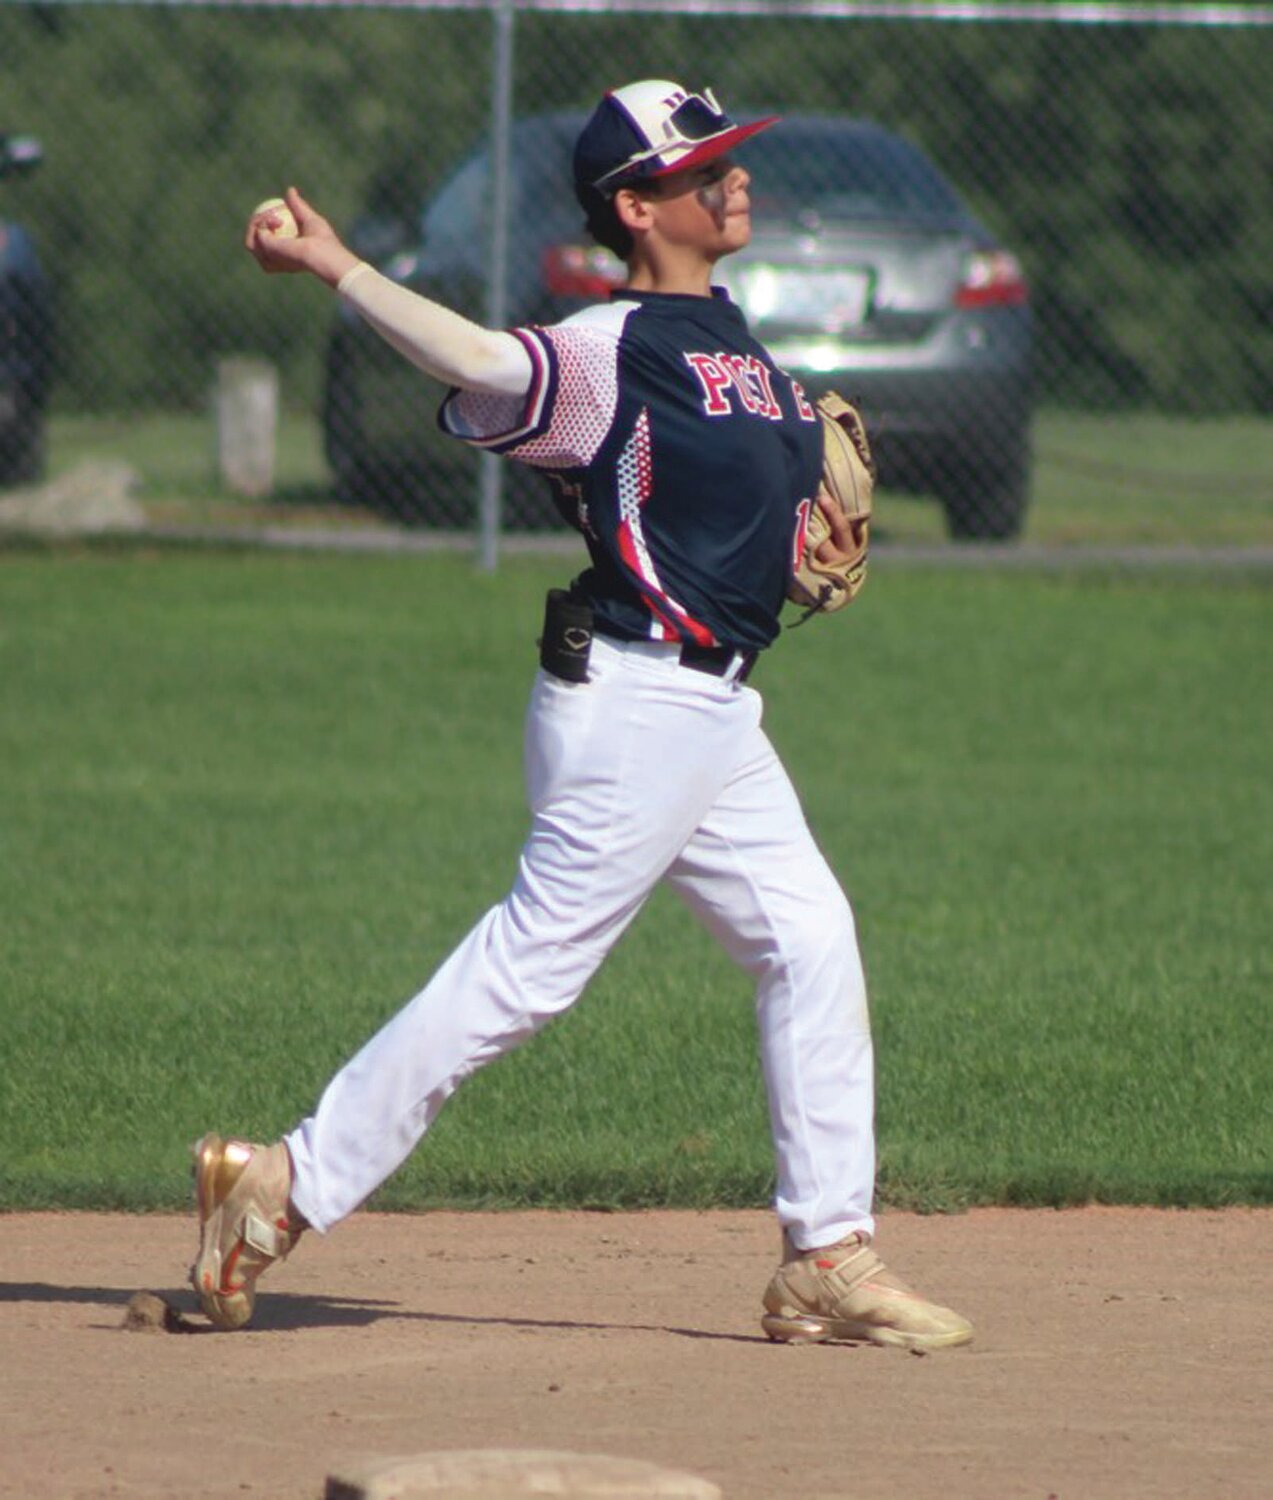 ON THE DIAMOND: Second baseman John Brown makes a play in the field.